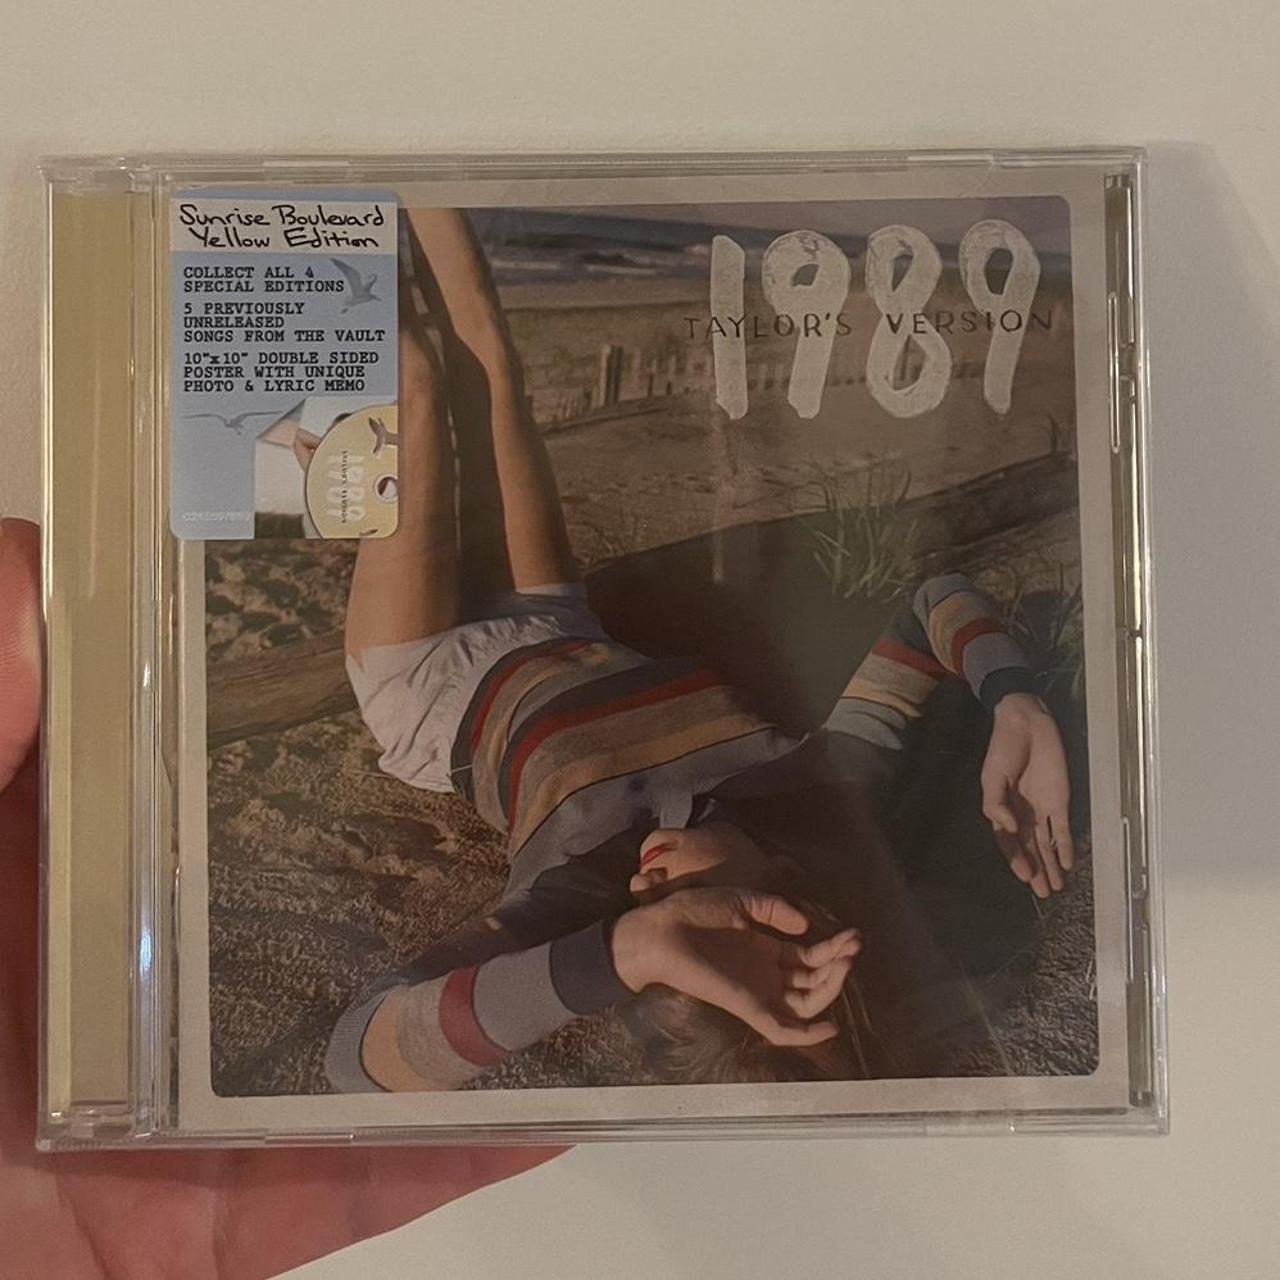 TAYLOR SWIFT 1989 (Taylor's Version) Sunrise Boulevard Yellow Deluxe Edition  CD